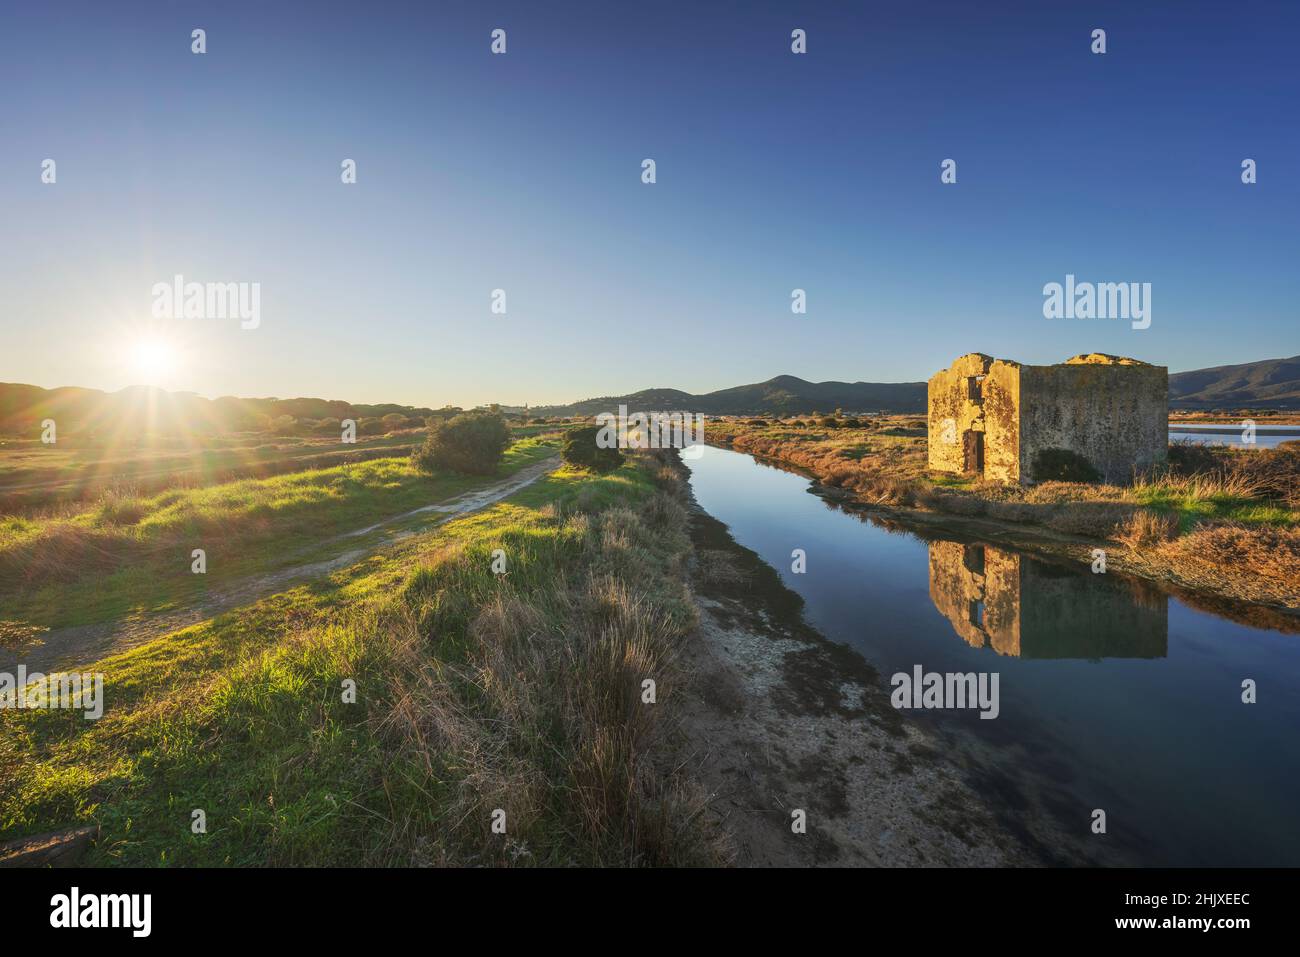 Castiglione della Pescaia at sunset, Diaccia Botrona water canal and a ruin of a house. Natural reserve of birds. Tuscany, Italy, Europe. Stock Photo